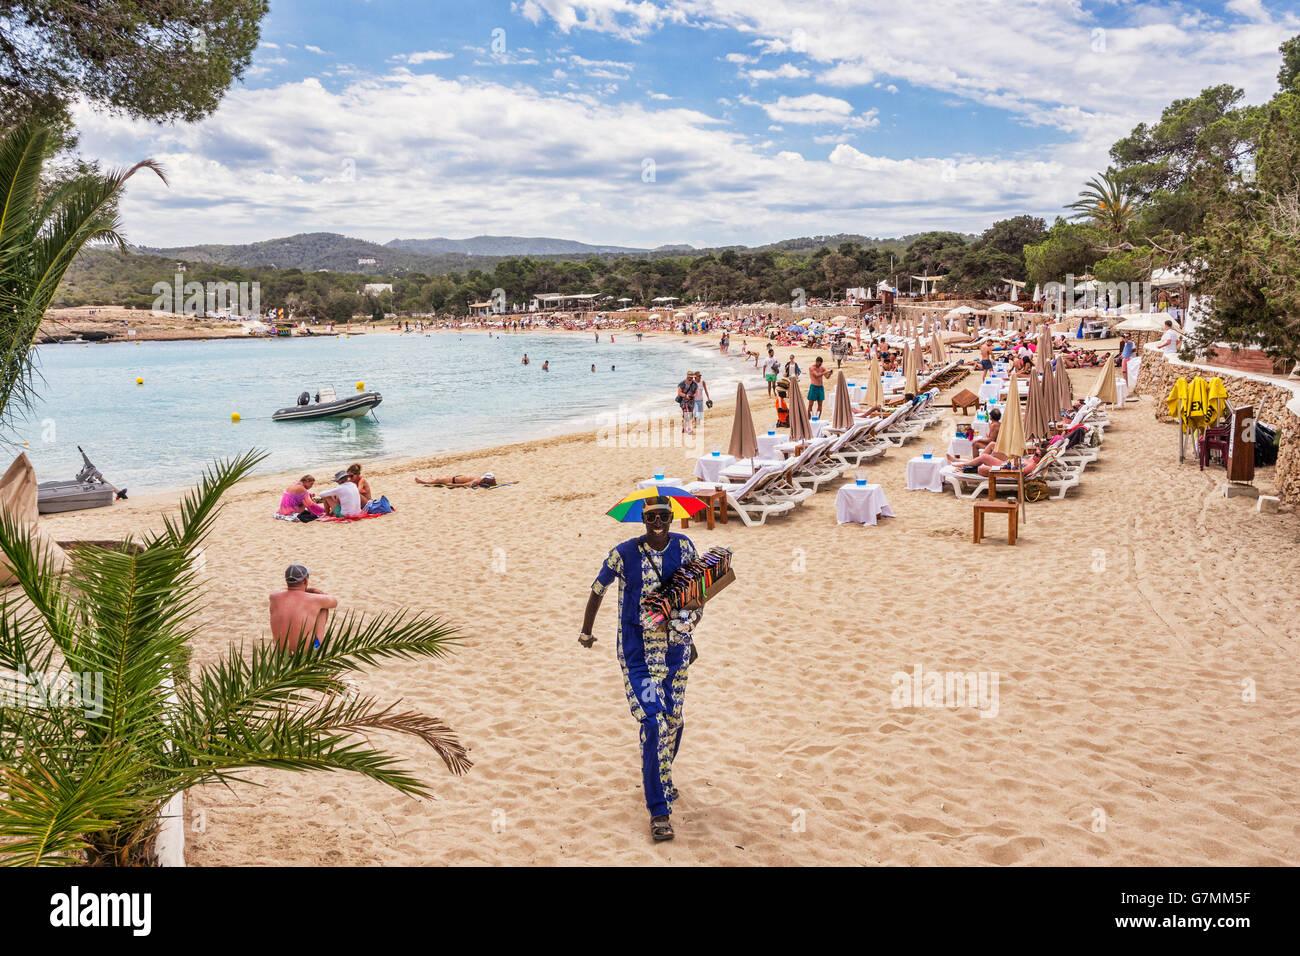 The beach at Cala Bassa, Ibiza, with beach vendor, known as looky looky man, approaching. Stock Photo